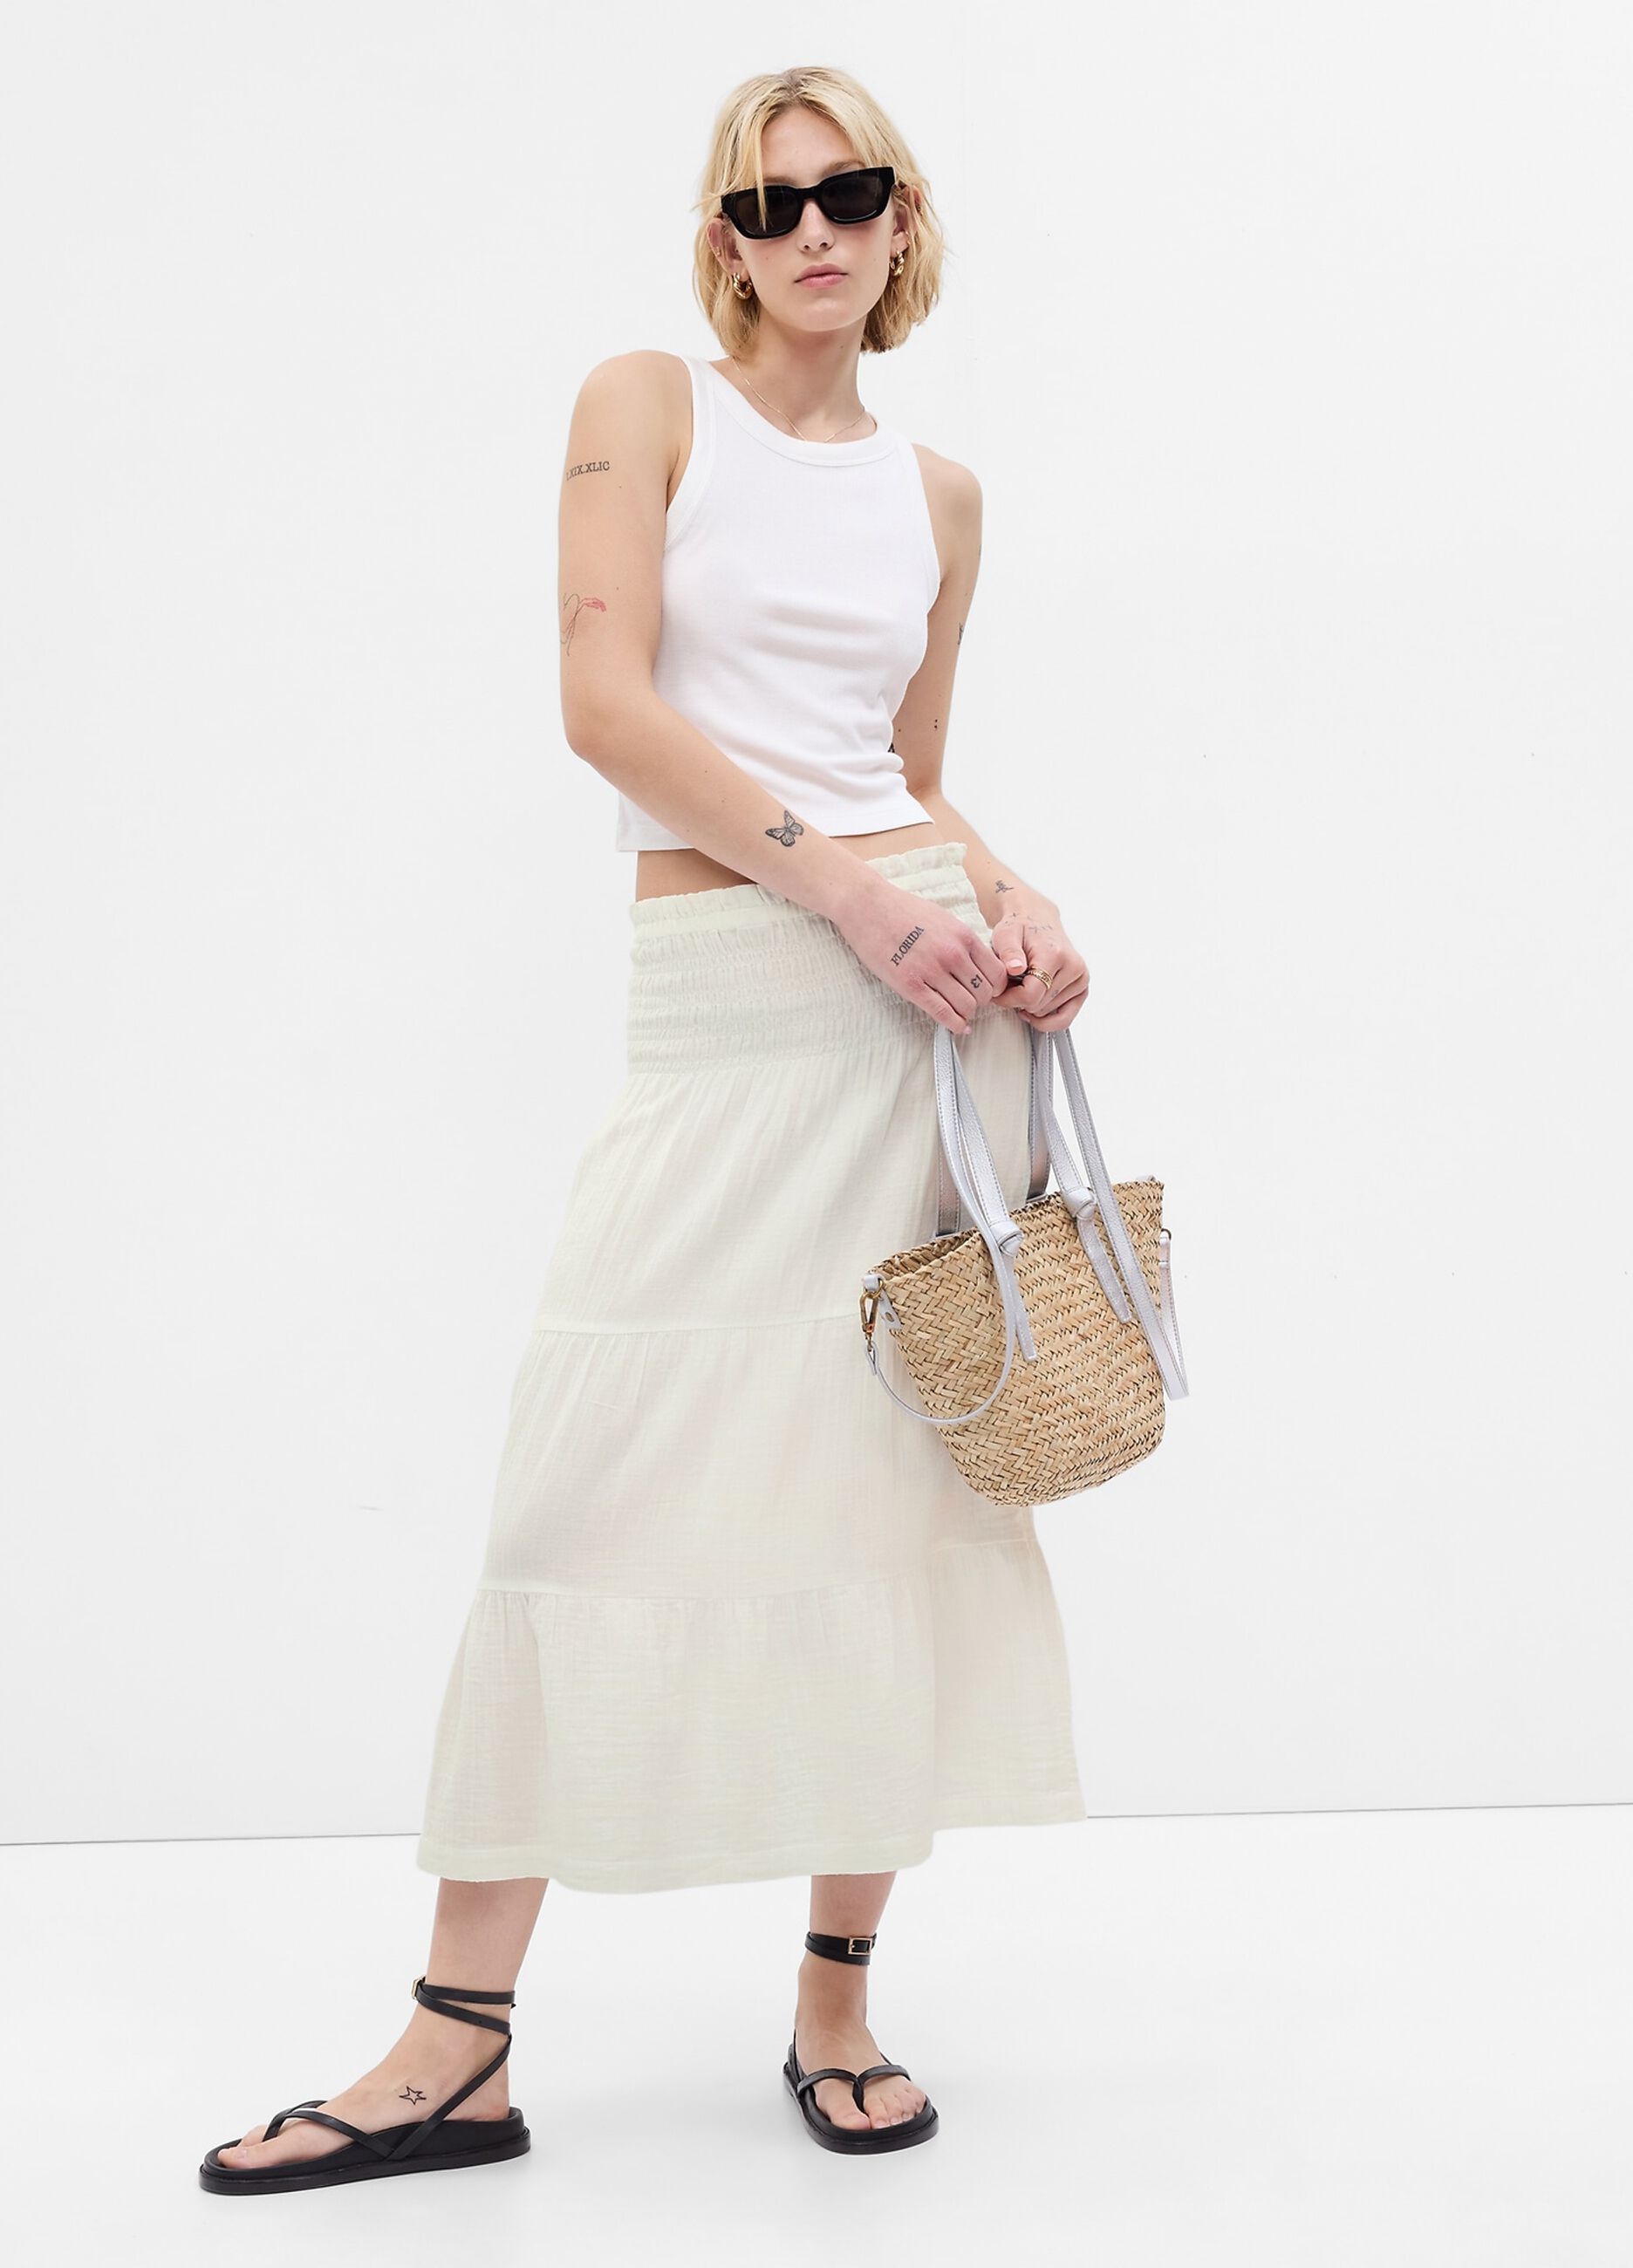 Tiered midi skirt in cotton gauze with flounces